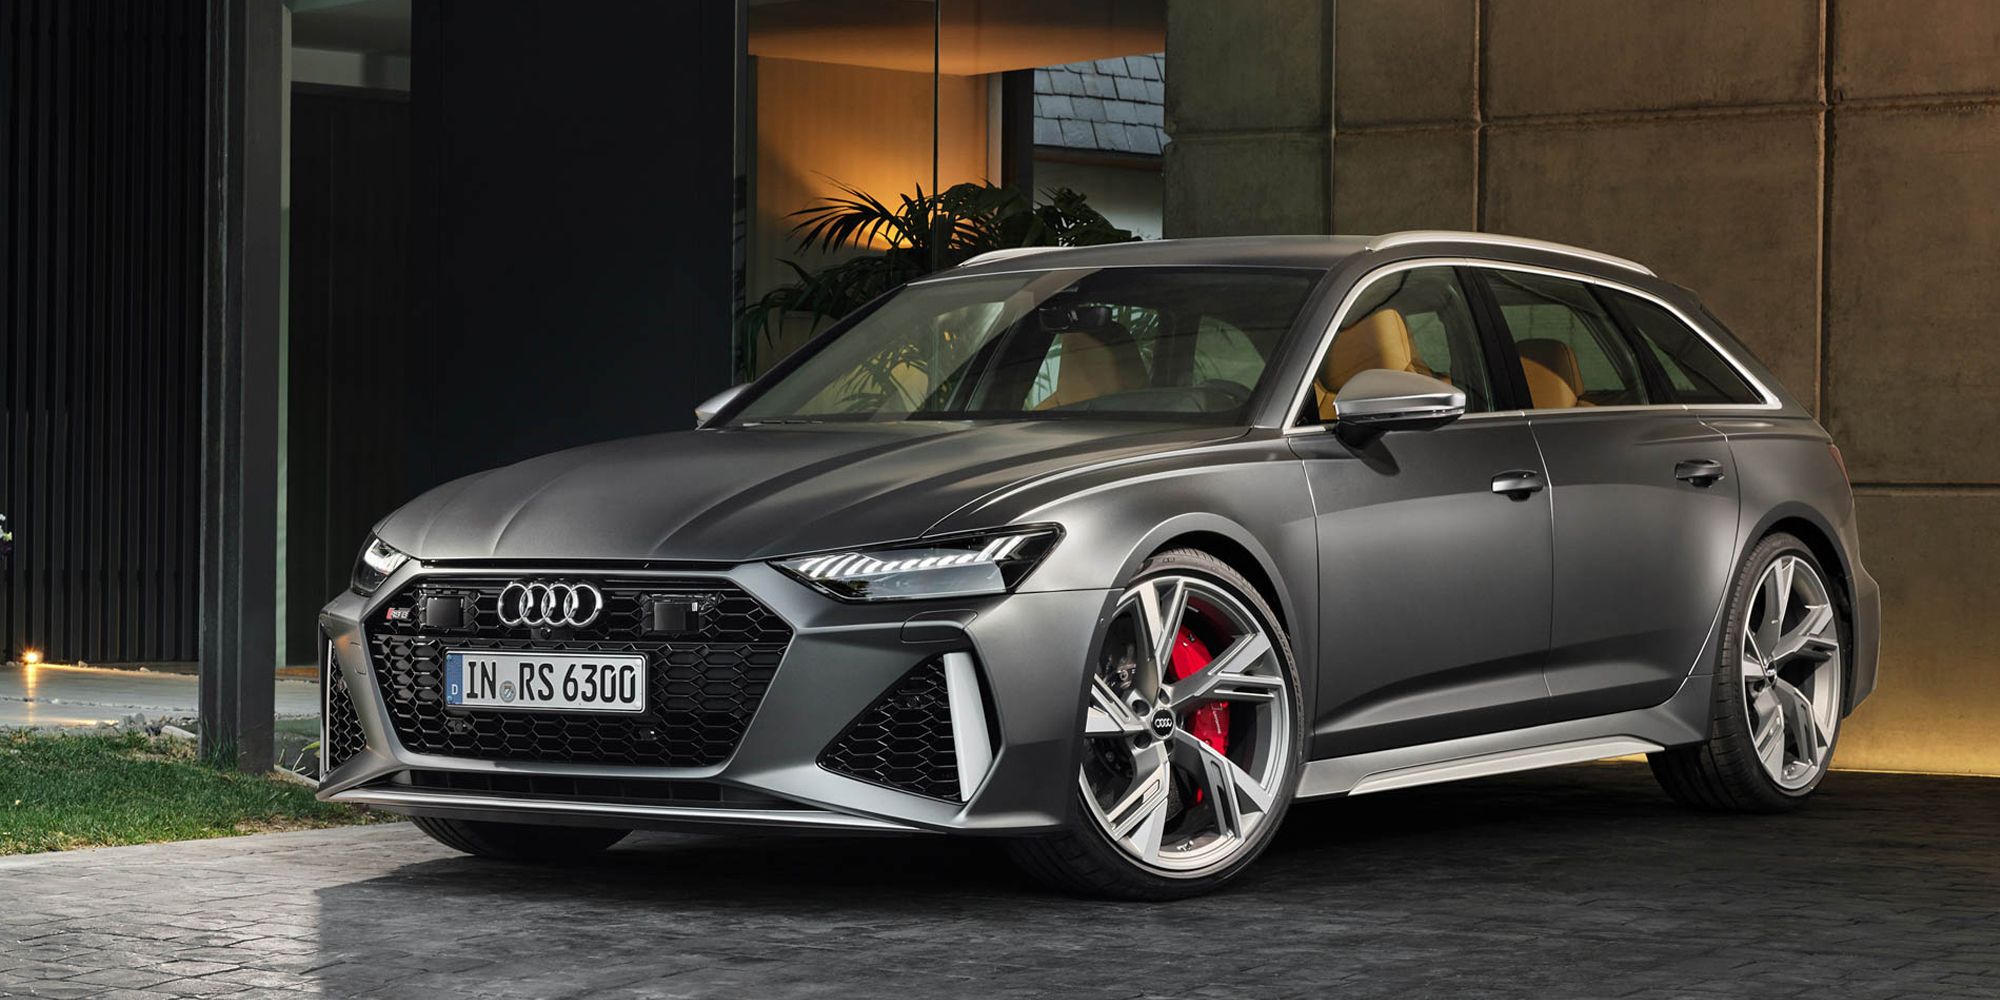 The new RS6 Avant in gray